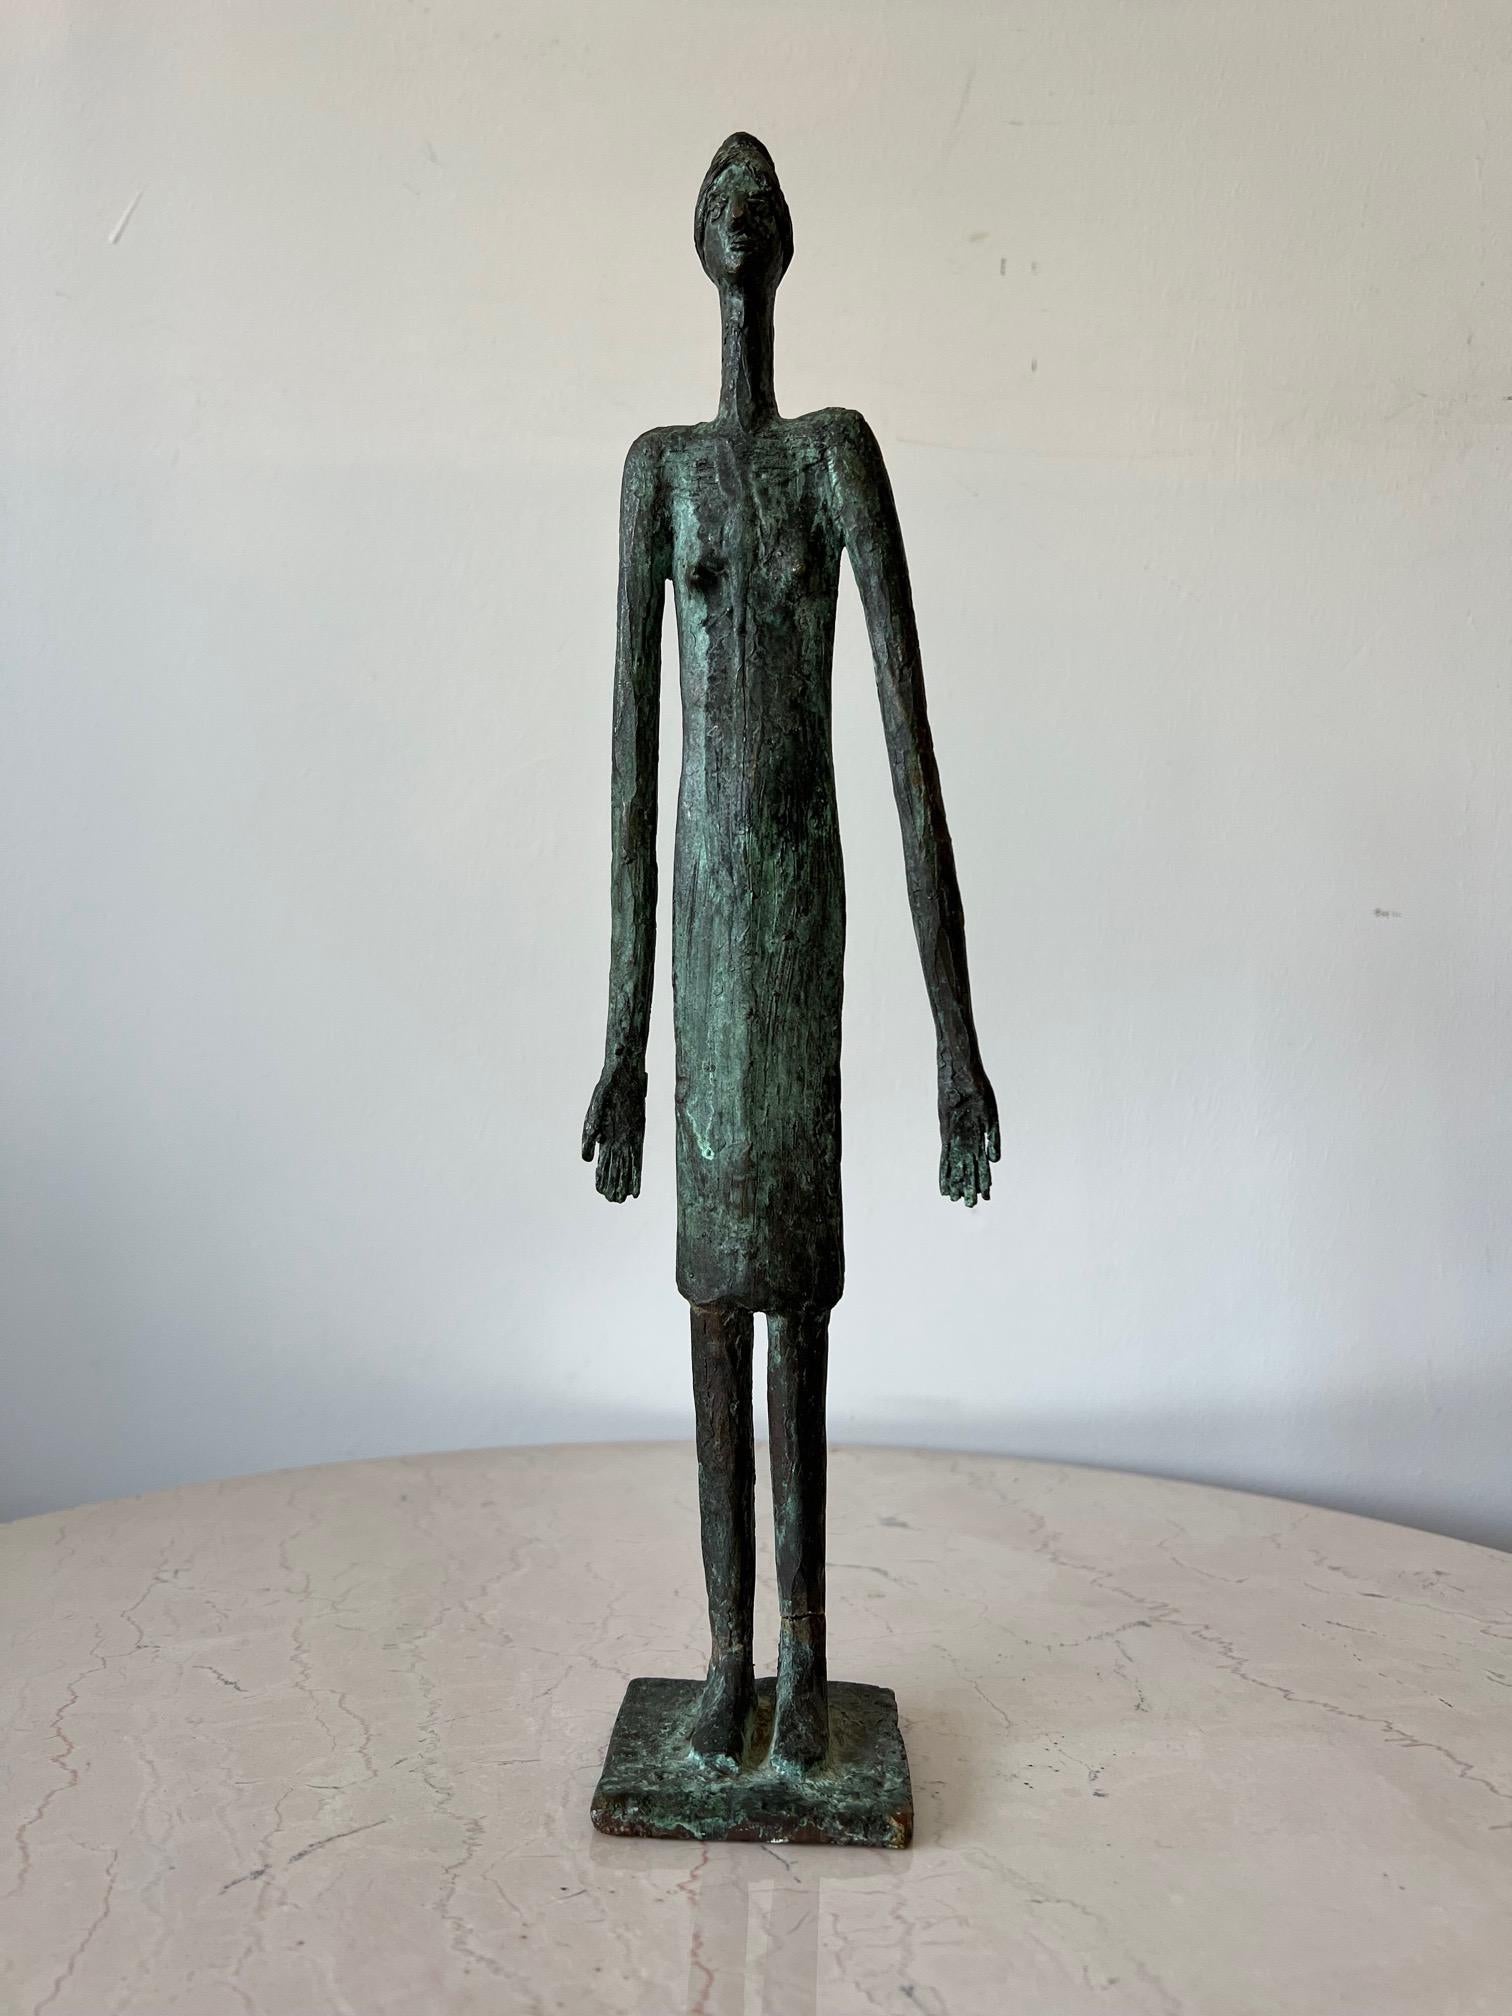 An unusual cast bronze sculpture by Anne Van Kleeck. Elongated figure-exaggerated and inspired by Giacometti. From the artist's estate. A note about the artist: Anne Van Kleeck was primarily known for her works in cast bronze and ceramics. She